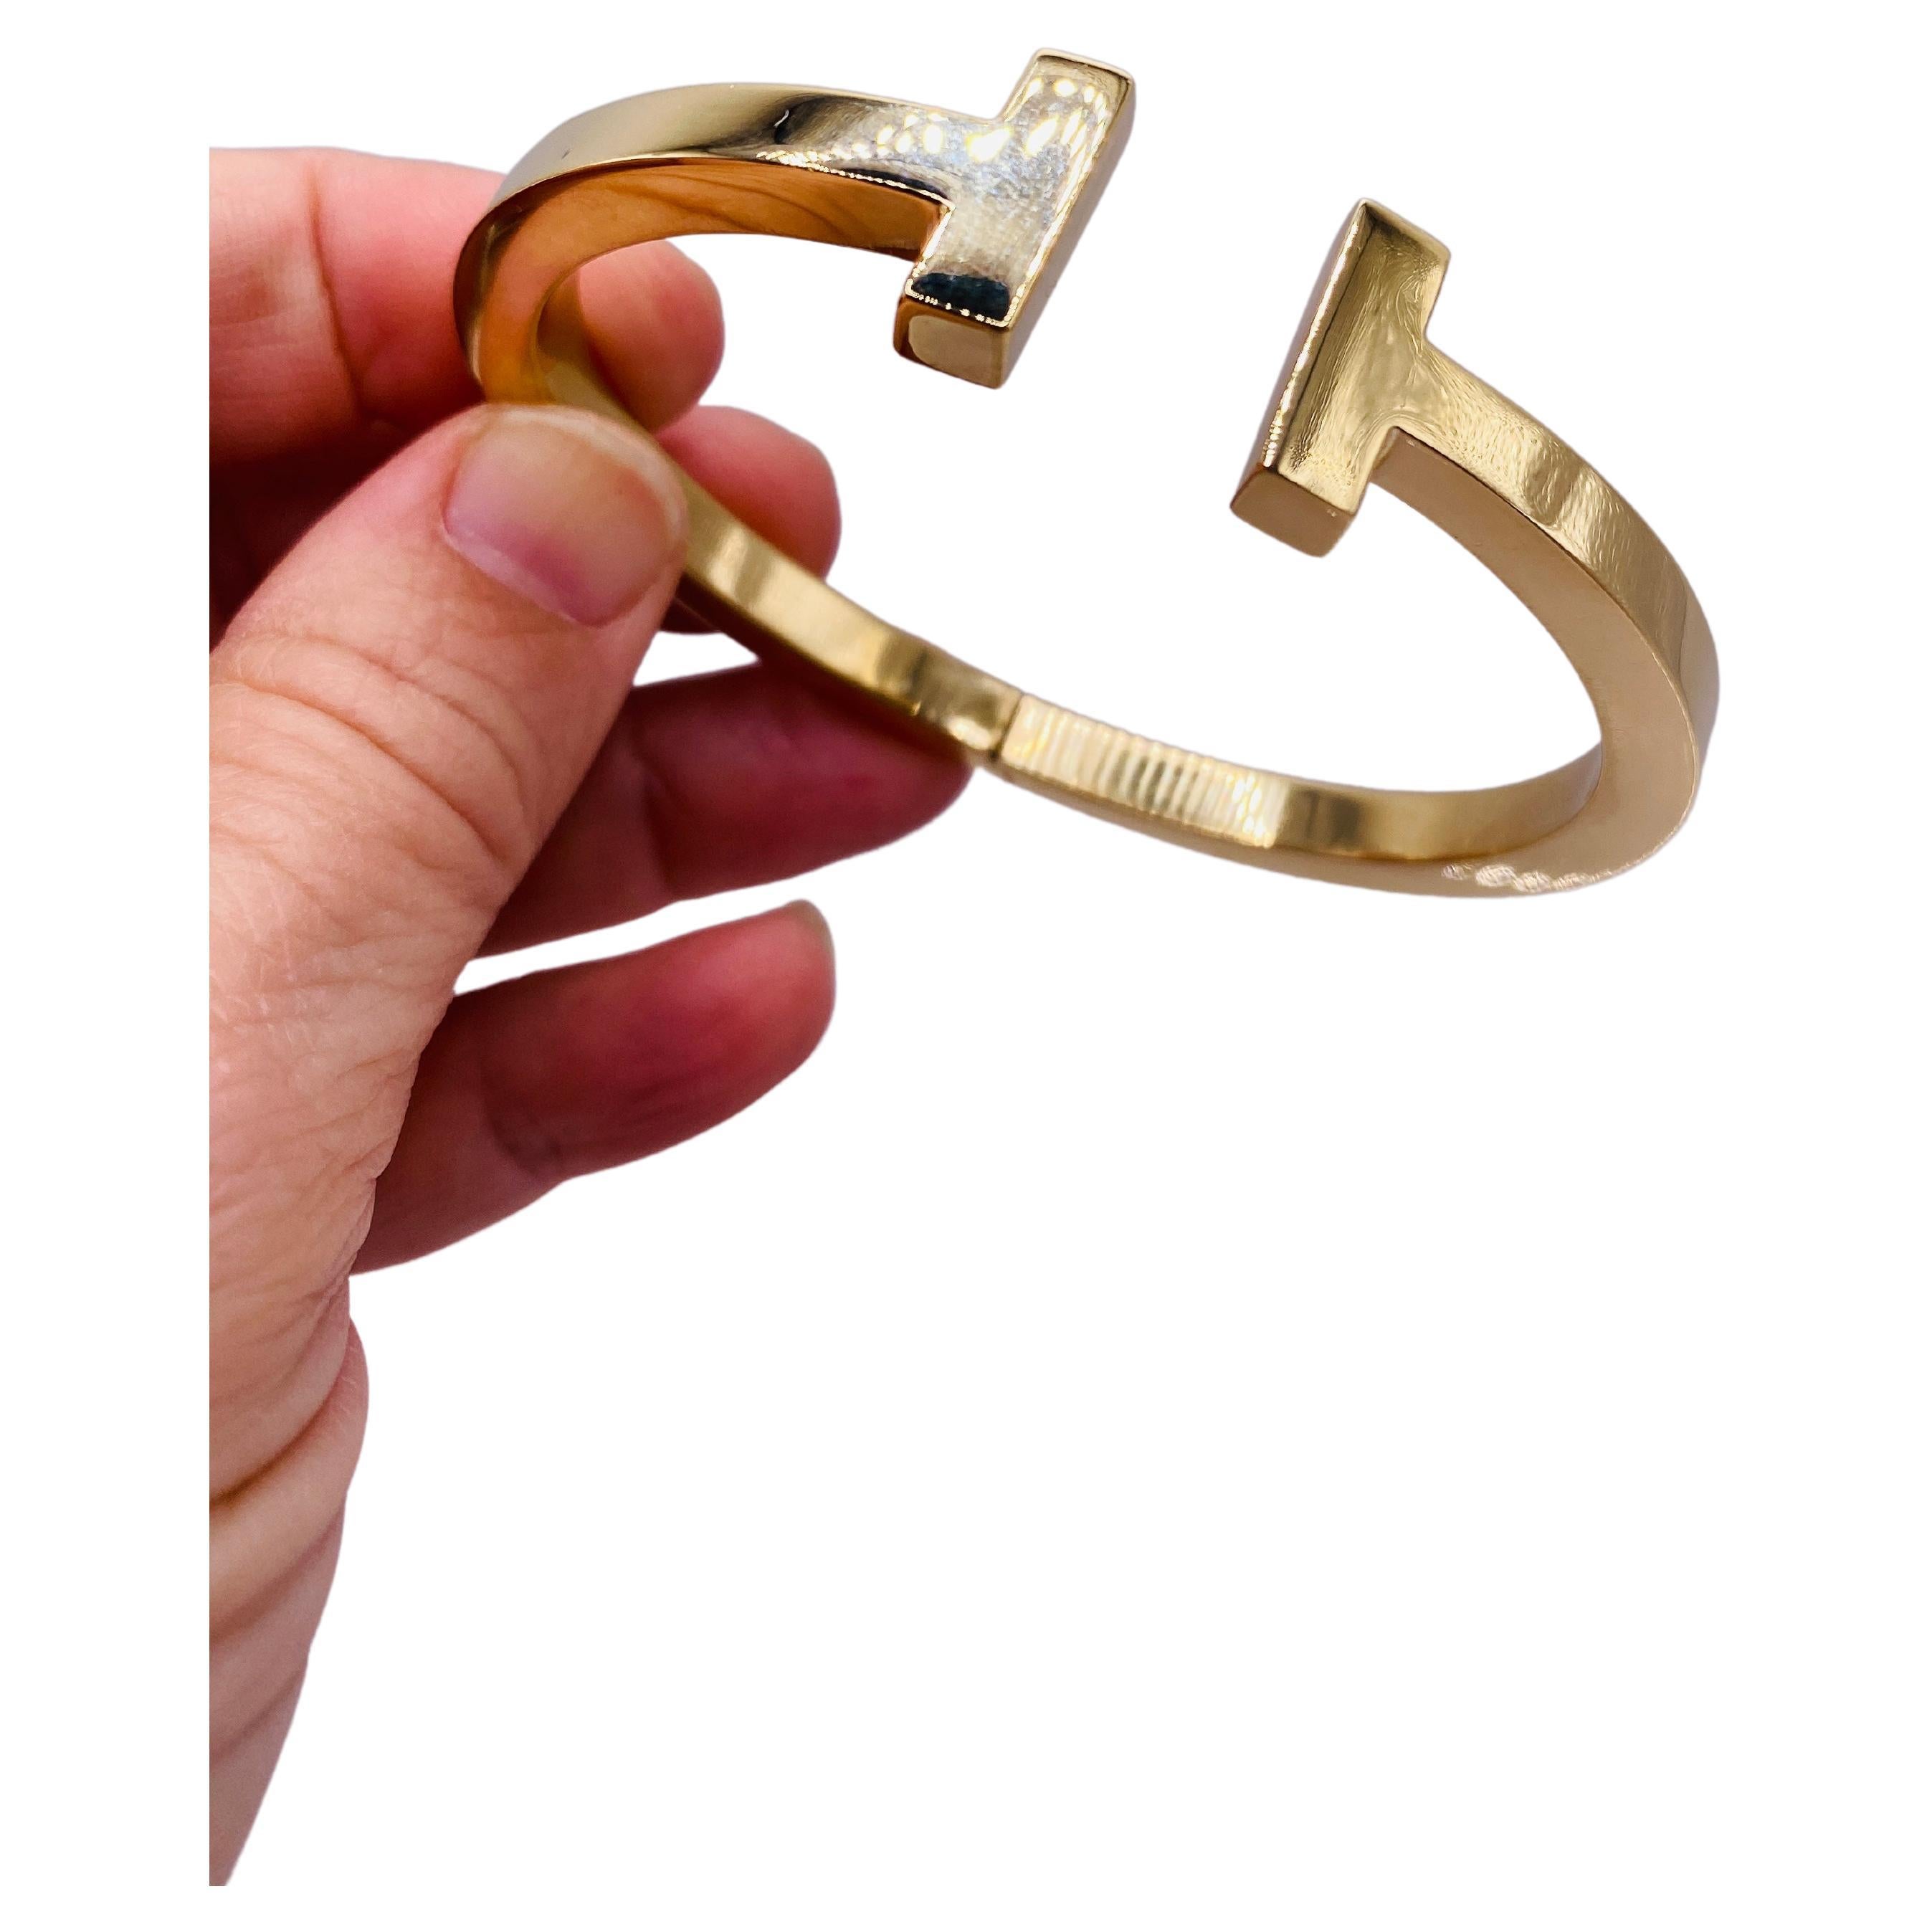 Tiffany & Co 18k yellow gold T Collection hinged bangle bracelet. Approx. 2.24 inches inner diameter. Wrist size in video is 6.25 inches. 17.7Dwt. MSRP $6,300. Product No. 60010736